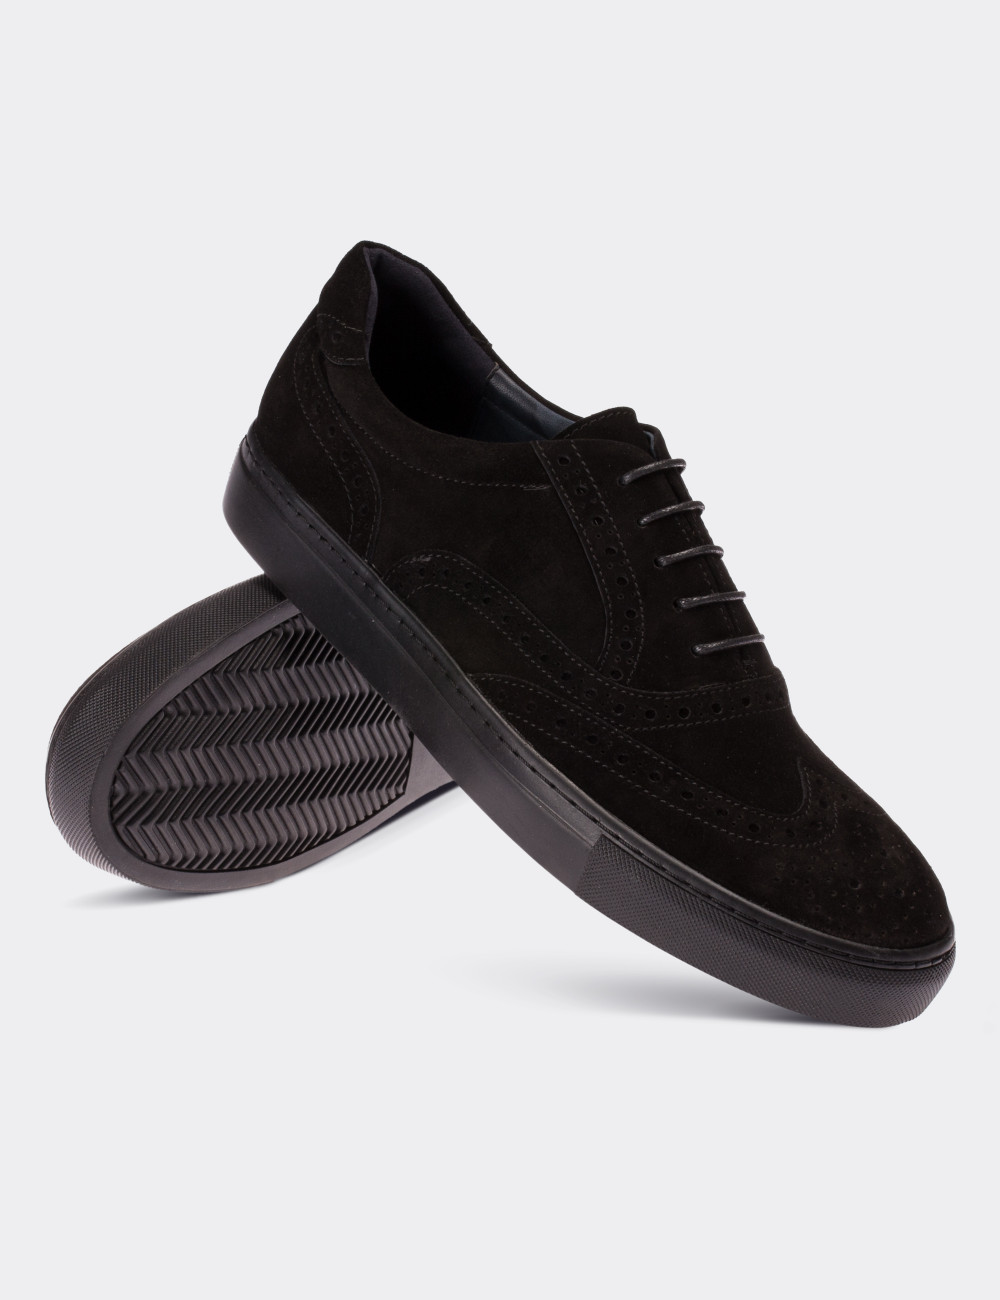 Black Suede Leather Sneakers - 01637MSYHC03